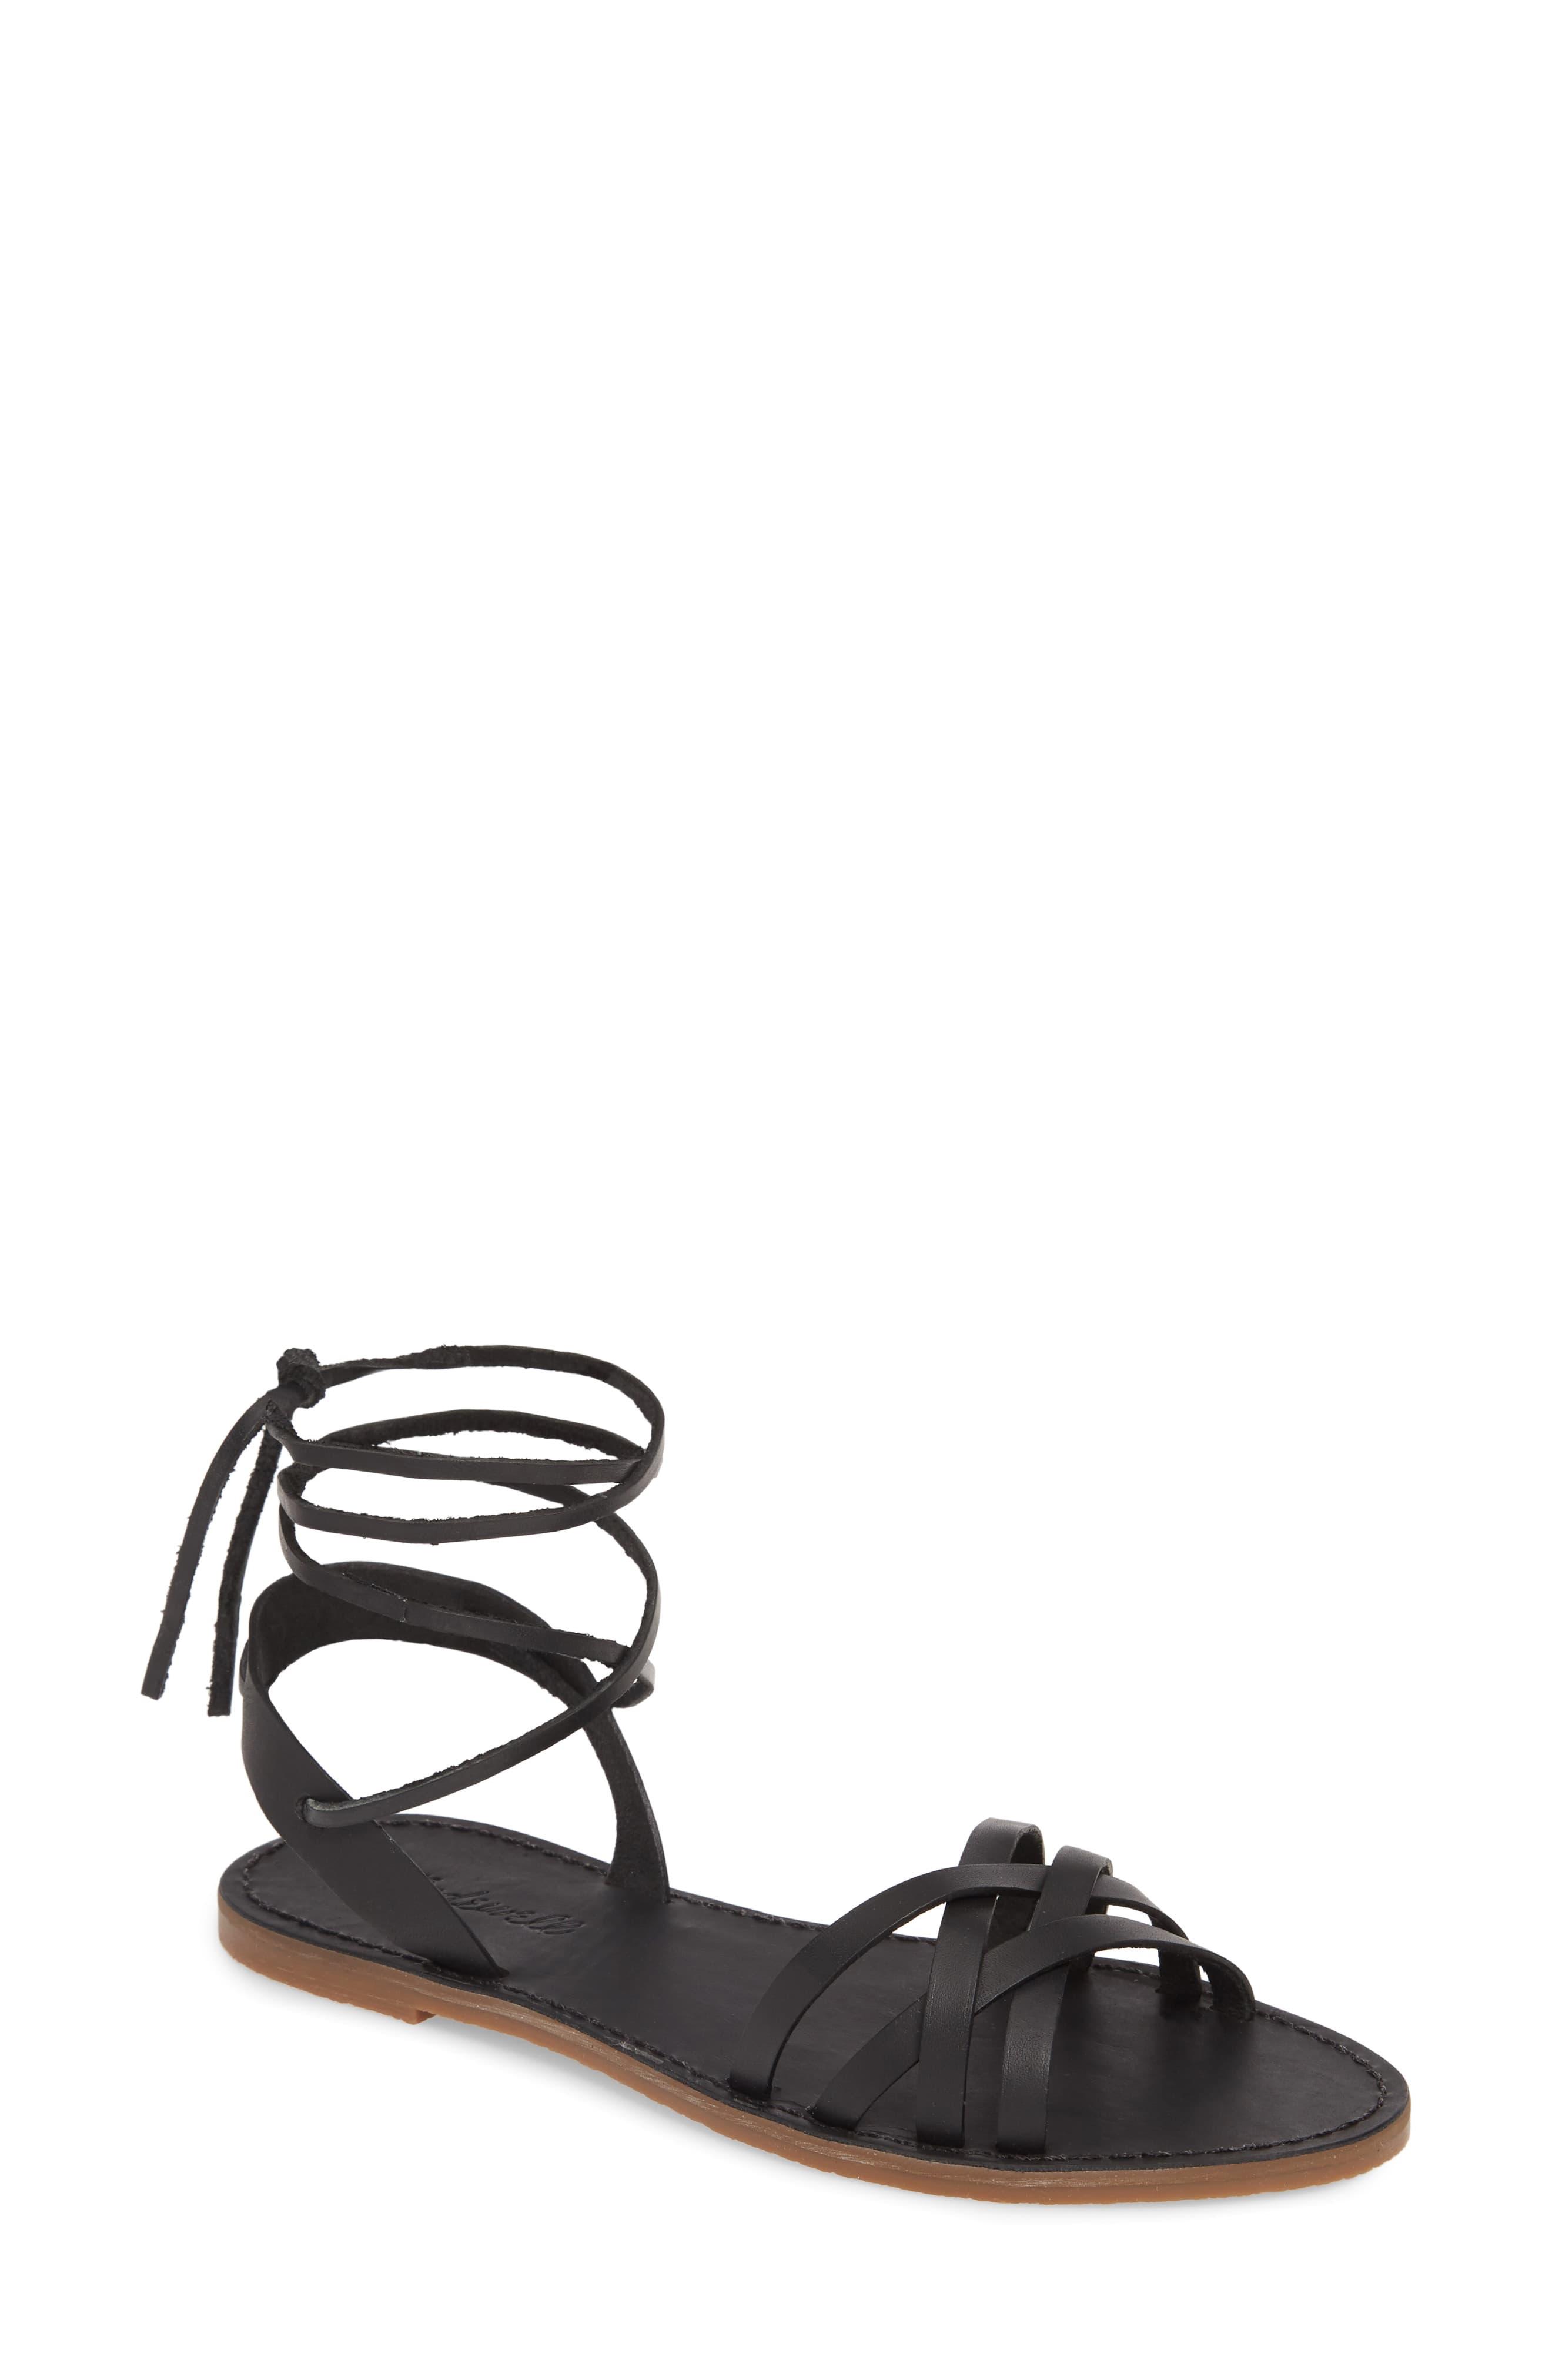 Madewell The Boardwalk Woven Lace Up Sandal in Black - Lyst